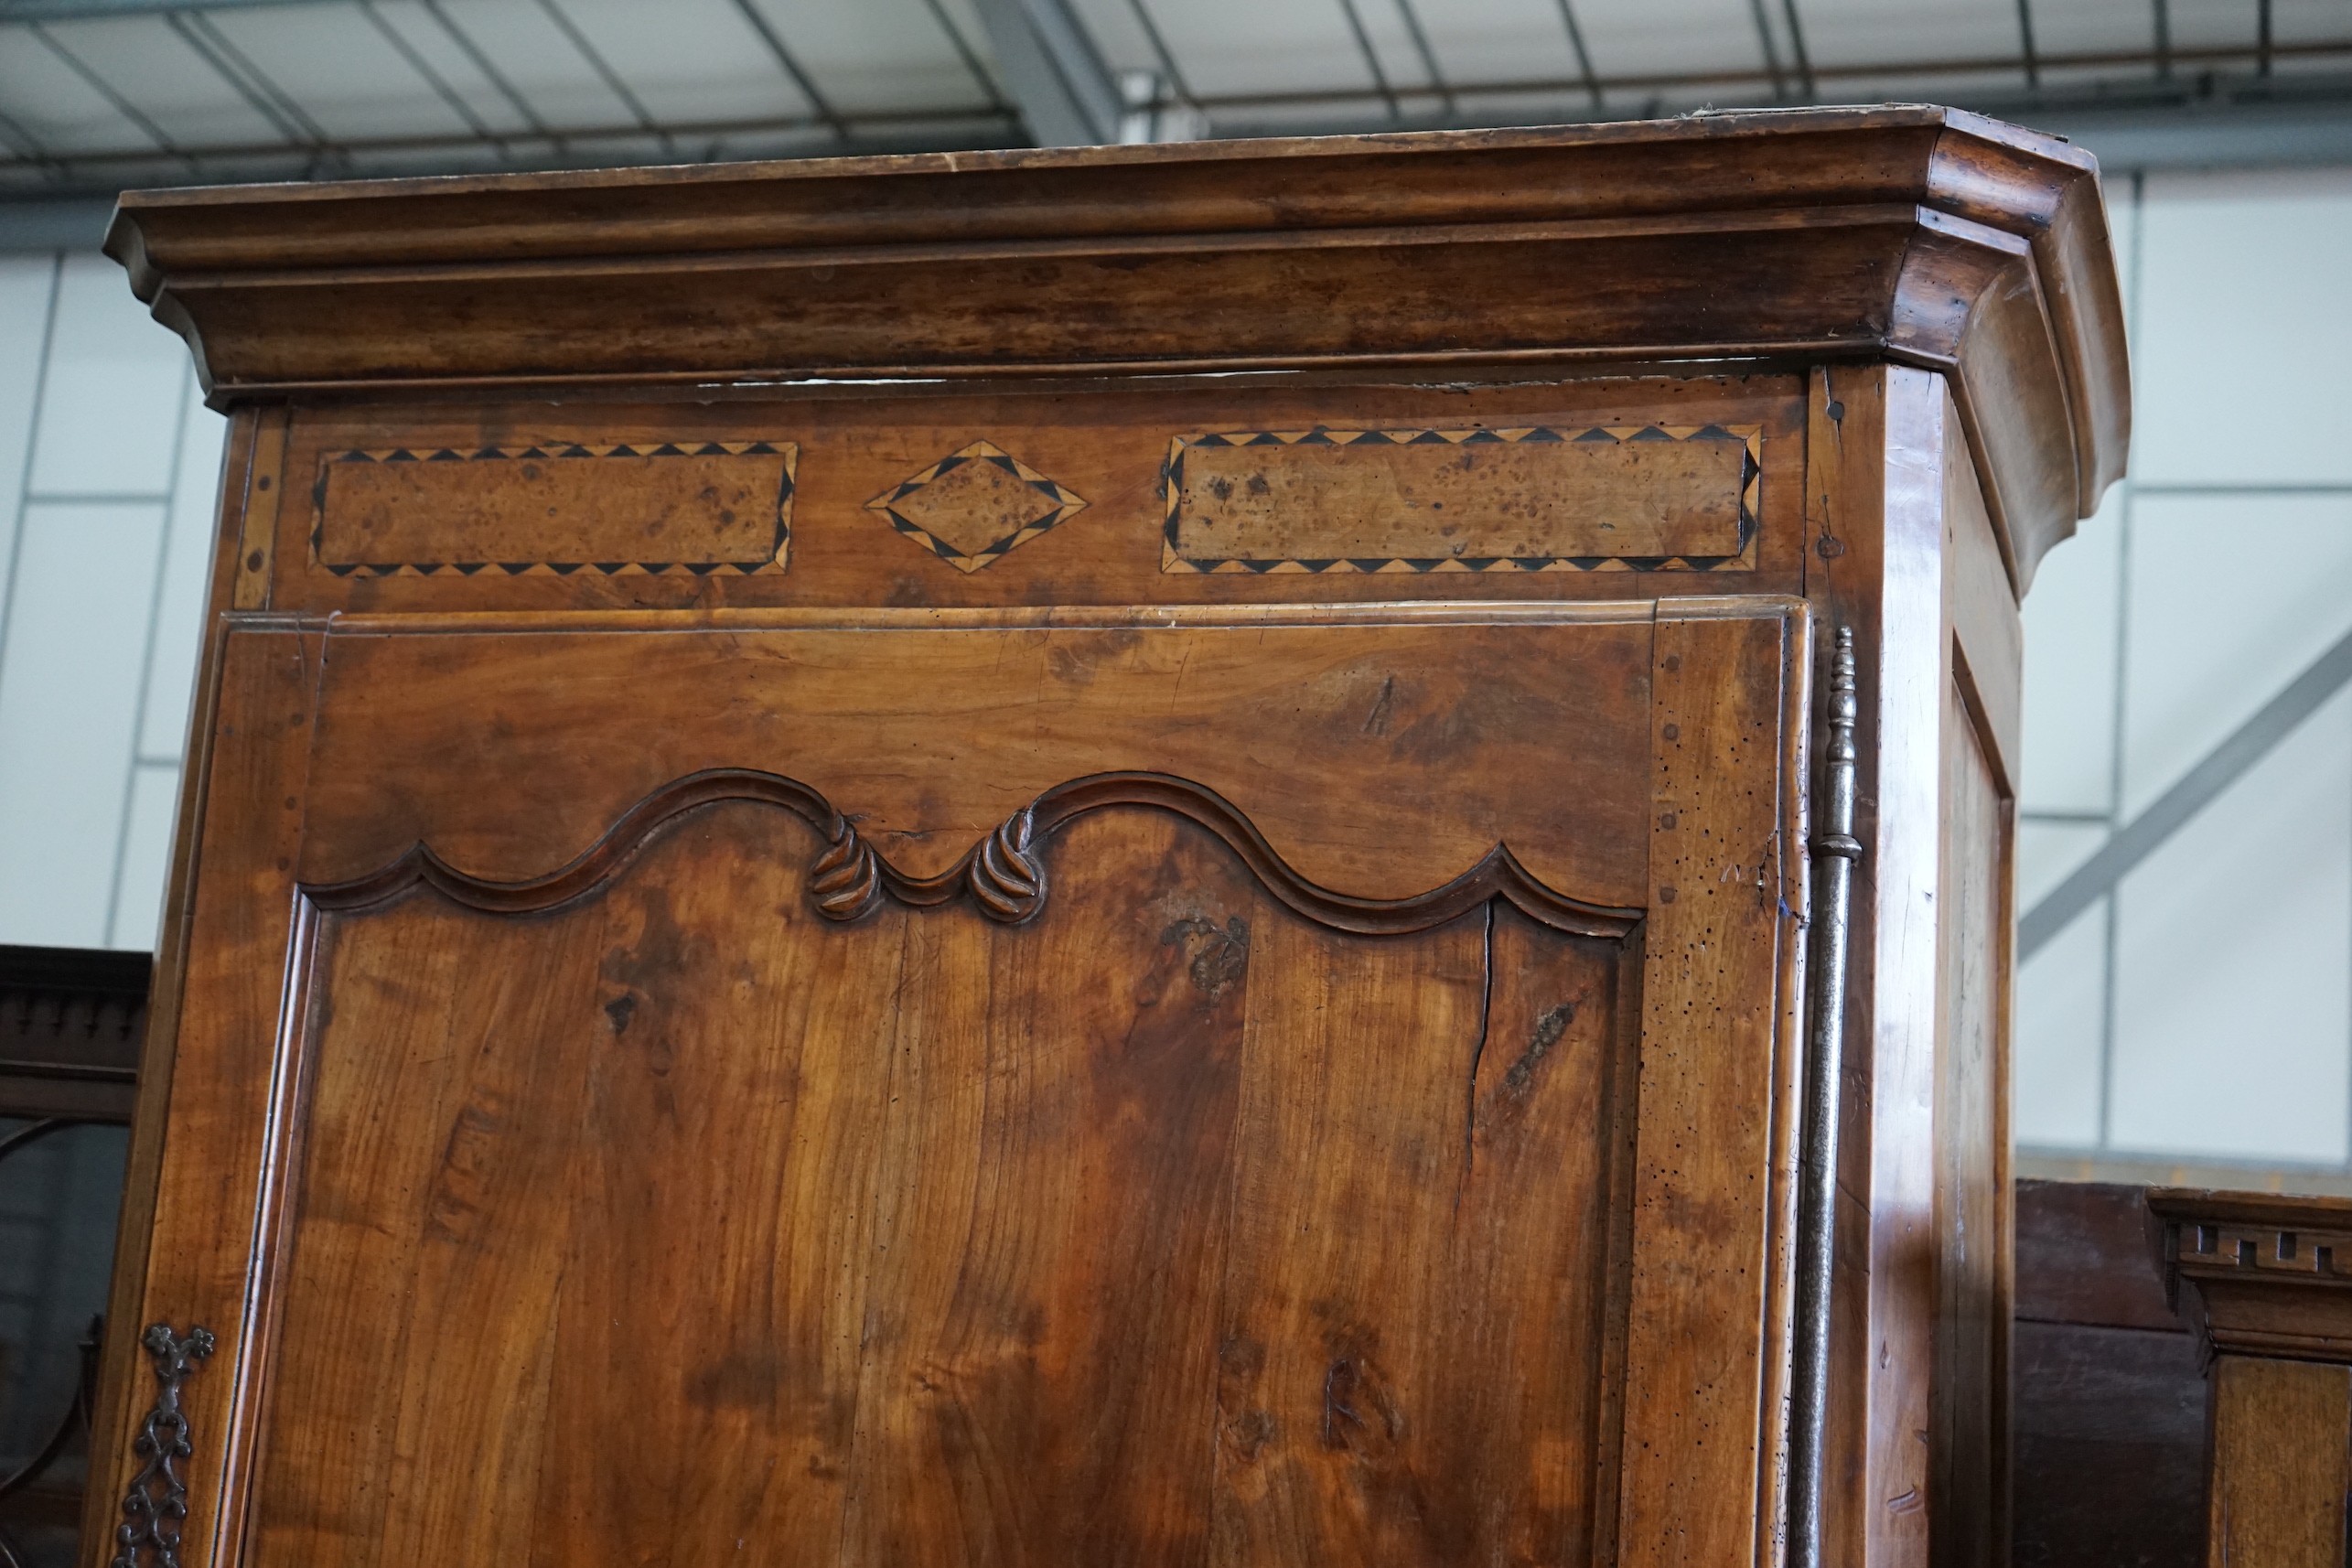 An early 19th century French parquetry inlaid walnut armoire, length 116cm, depth 69cm, height 227cm